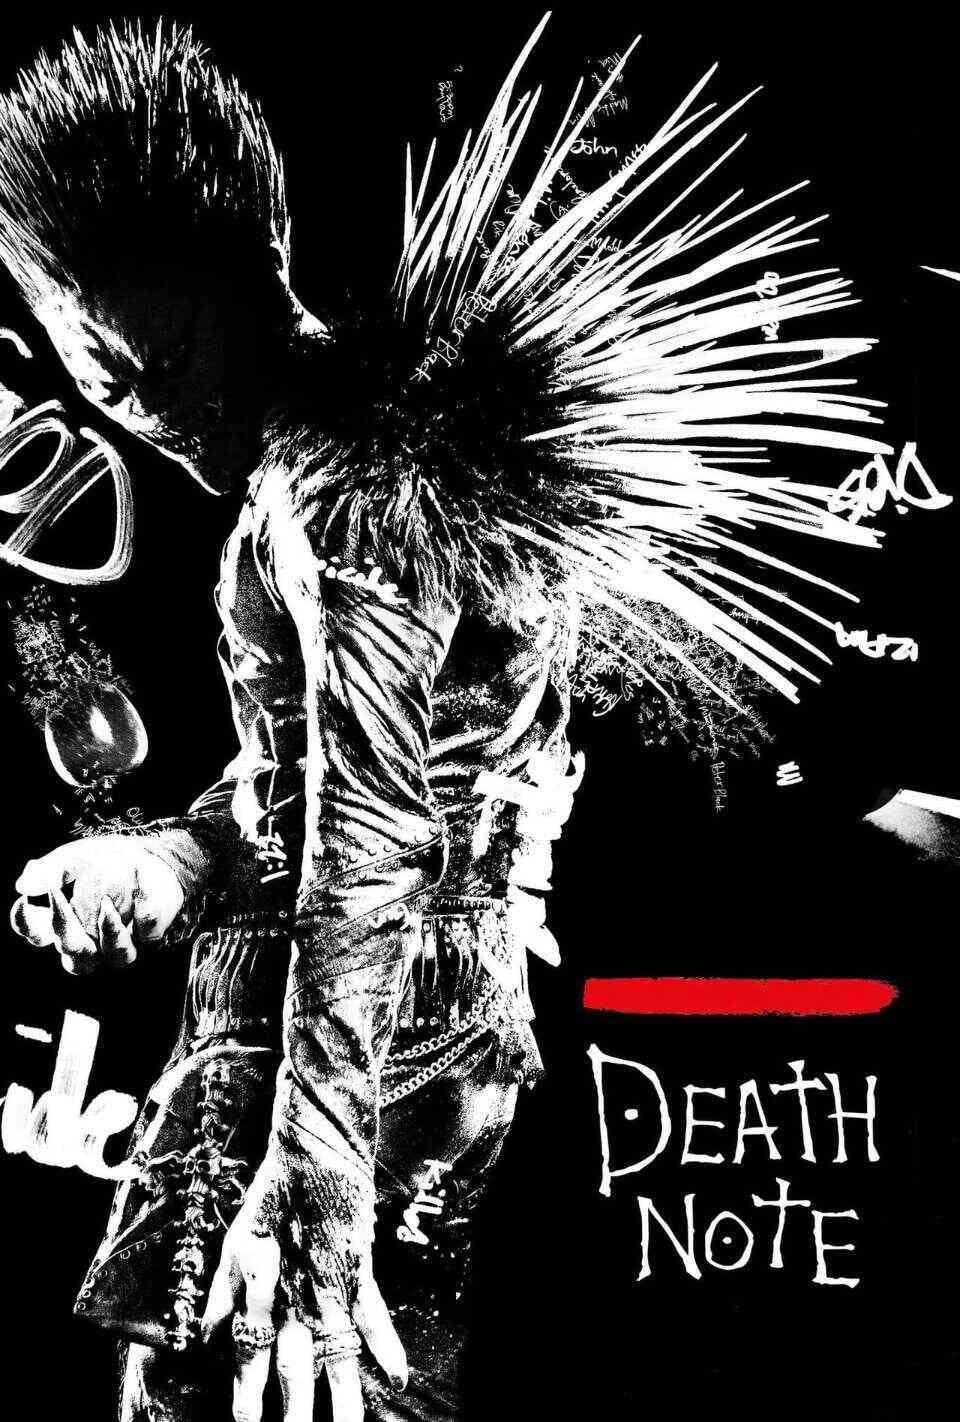 Read Death Note screenplay (poster)